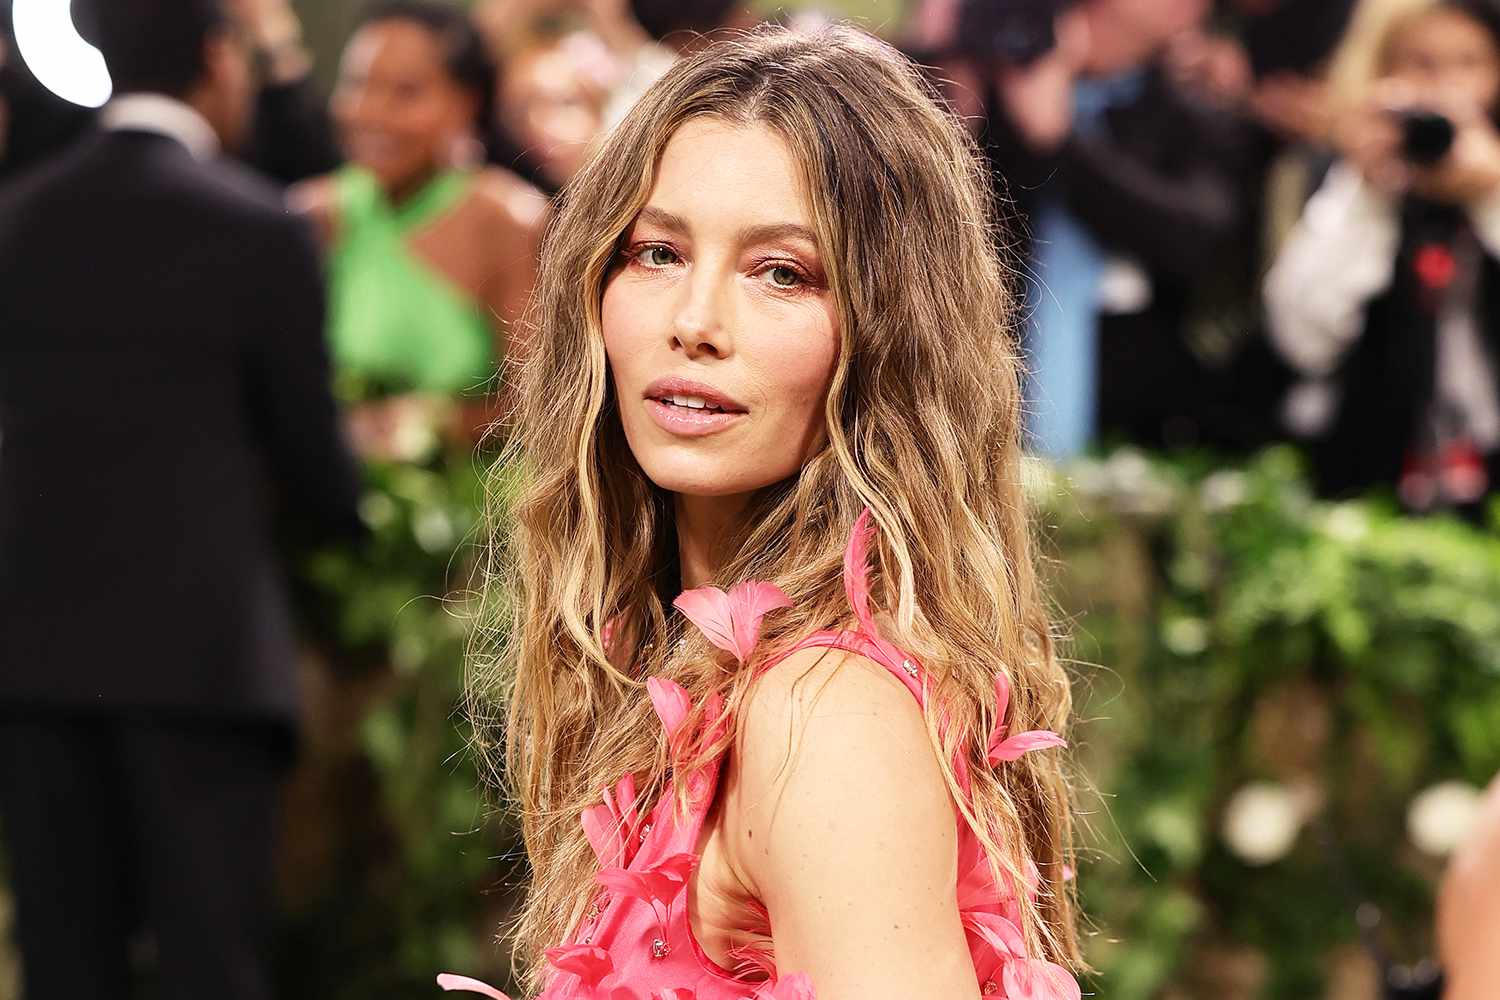 Jessica Biel Reveals 9-Year-Old Son’s Reaction After Reading Her Book About Periods: ‘He Was So Cool About It...